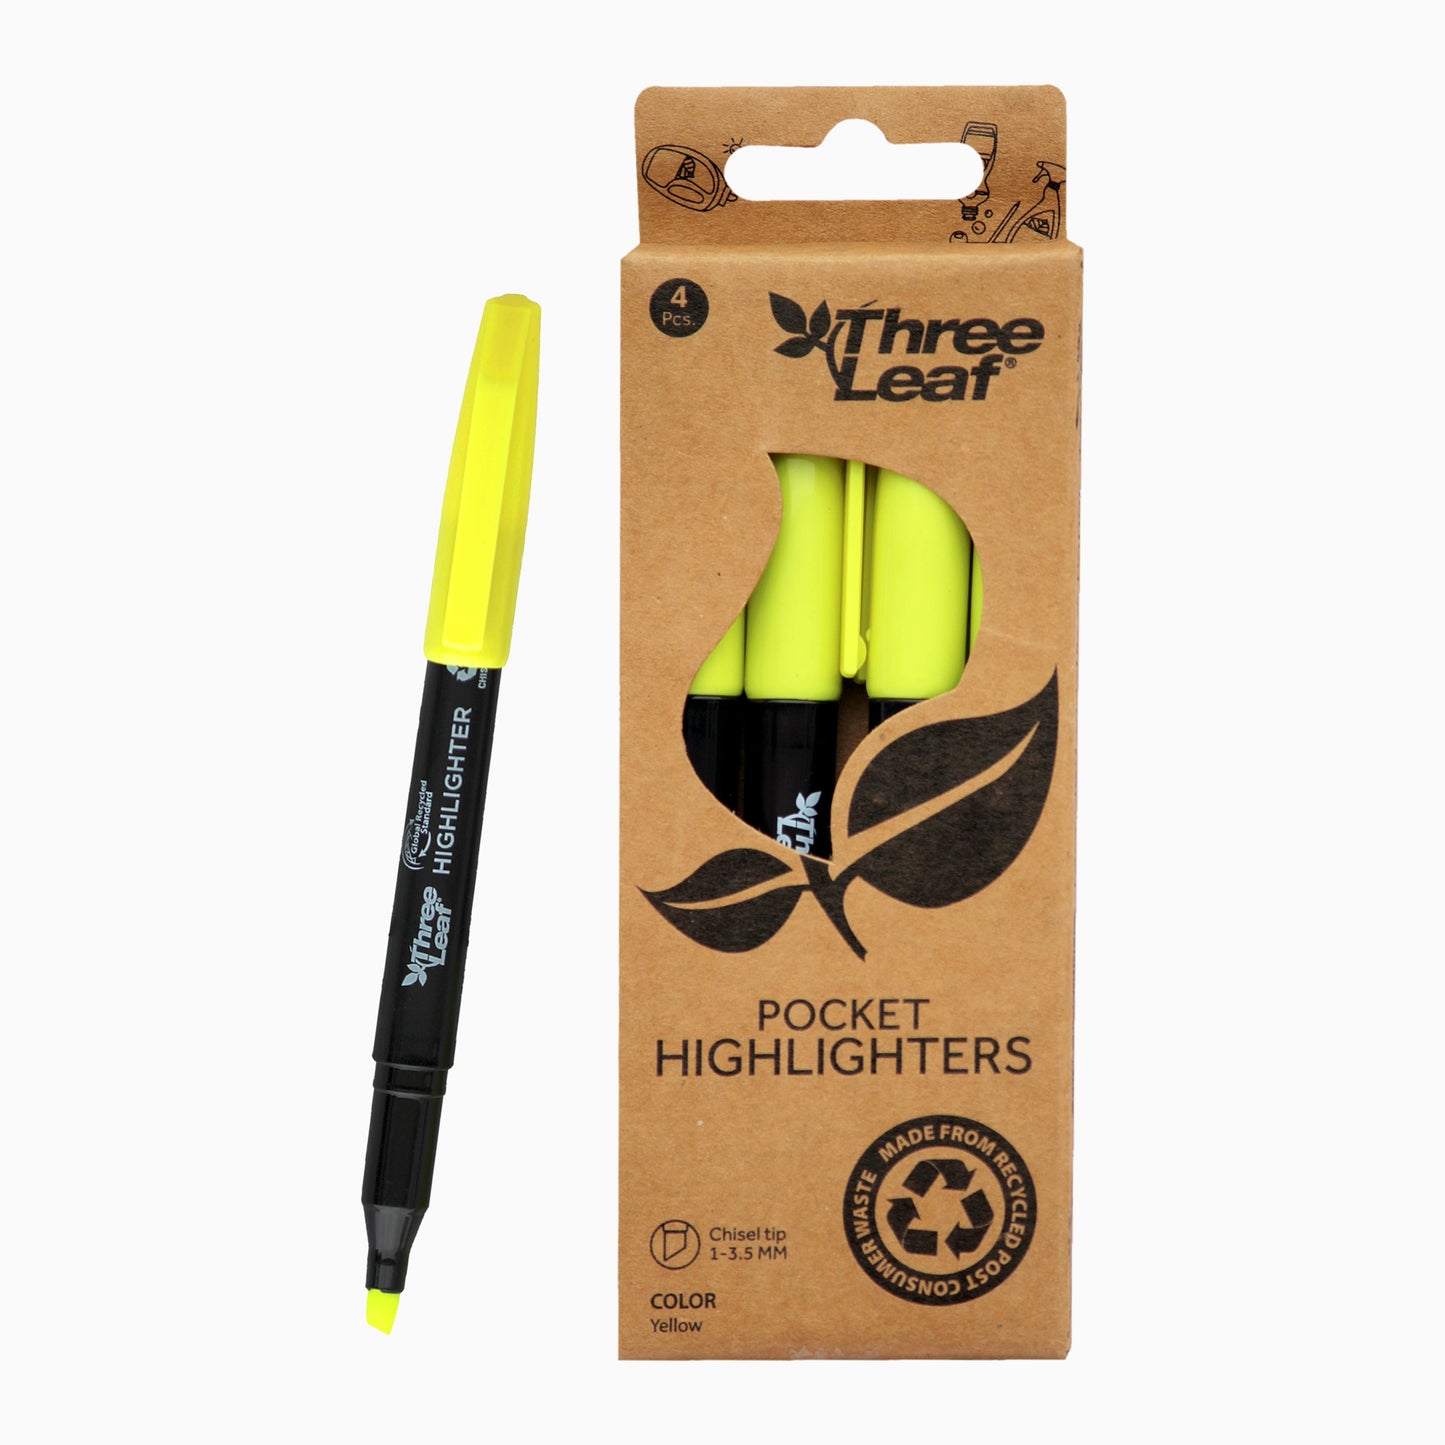 Three Leaf Highlighter 4 Pack, Yellow, Chisel Tip (72 Pack Per Case)